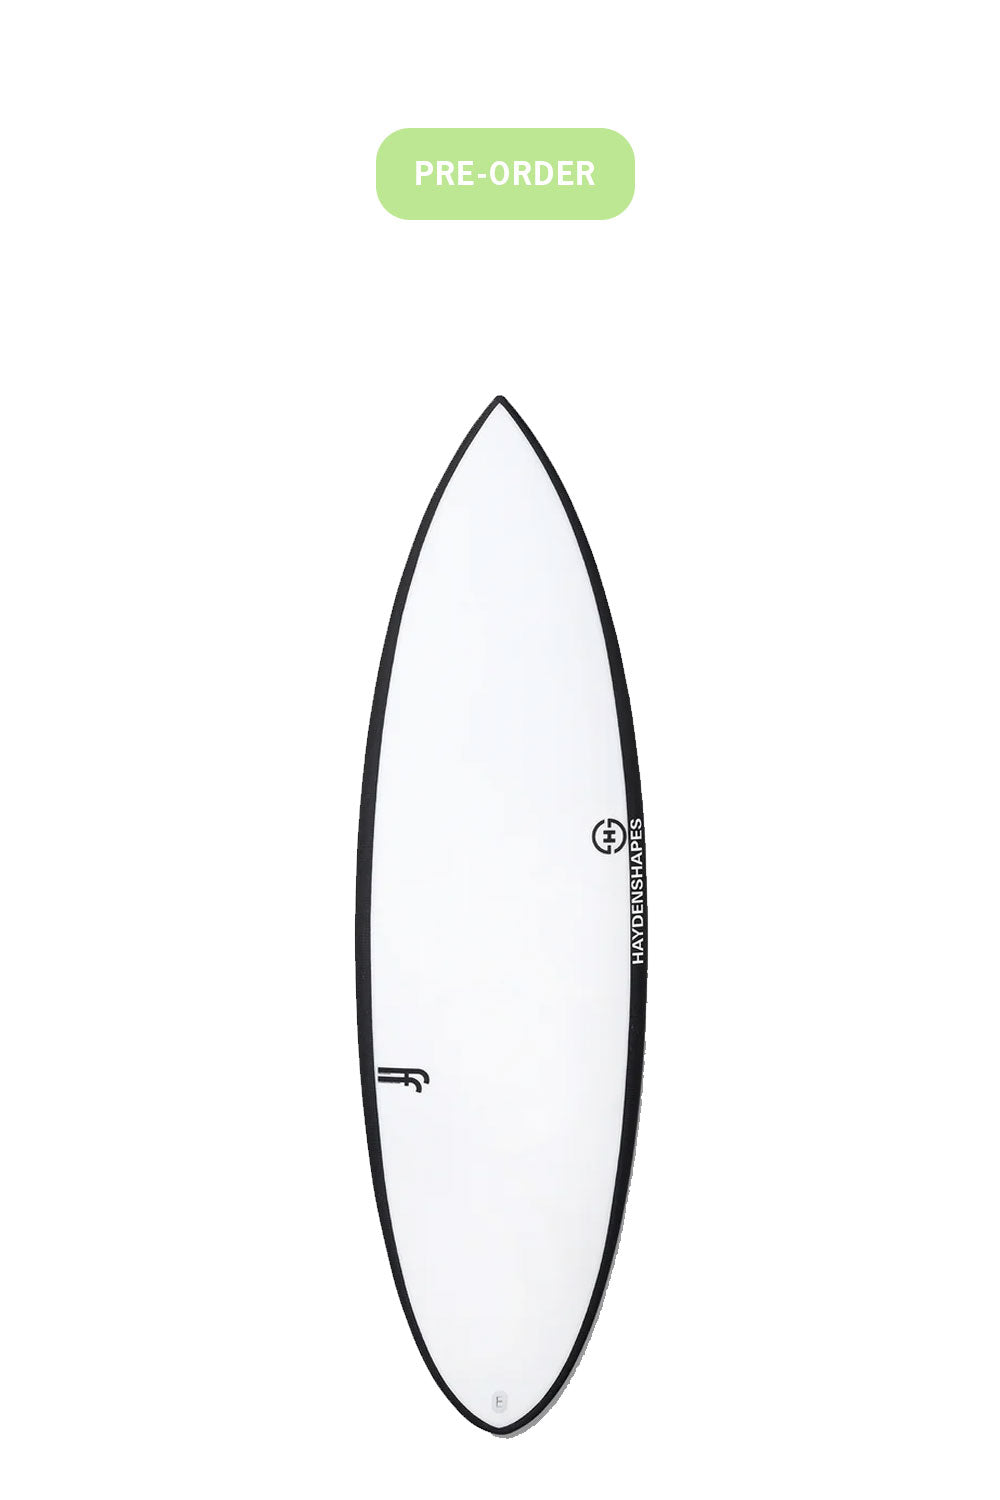 Pukas-Surf-Shop-HaydenShapes-Surfboards-Pre-Order-holy-hypto-clear